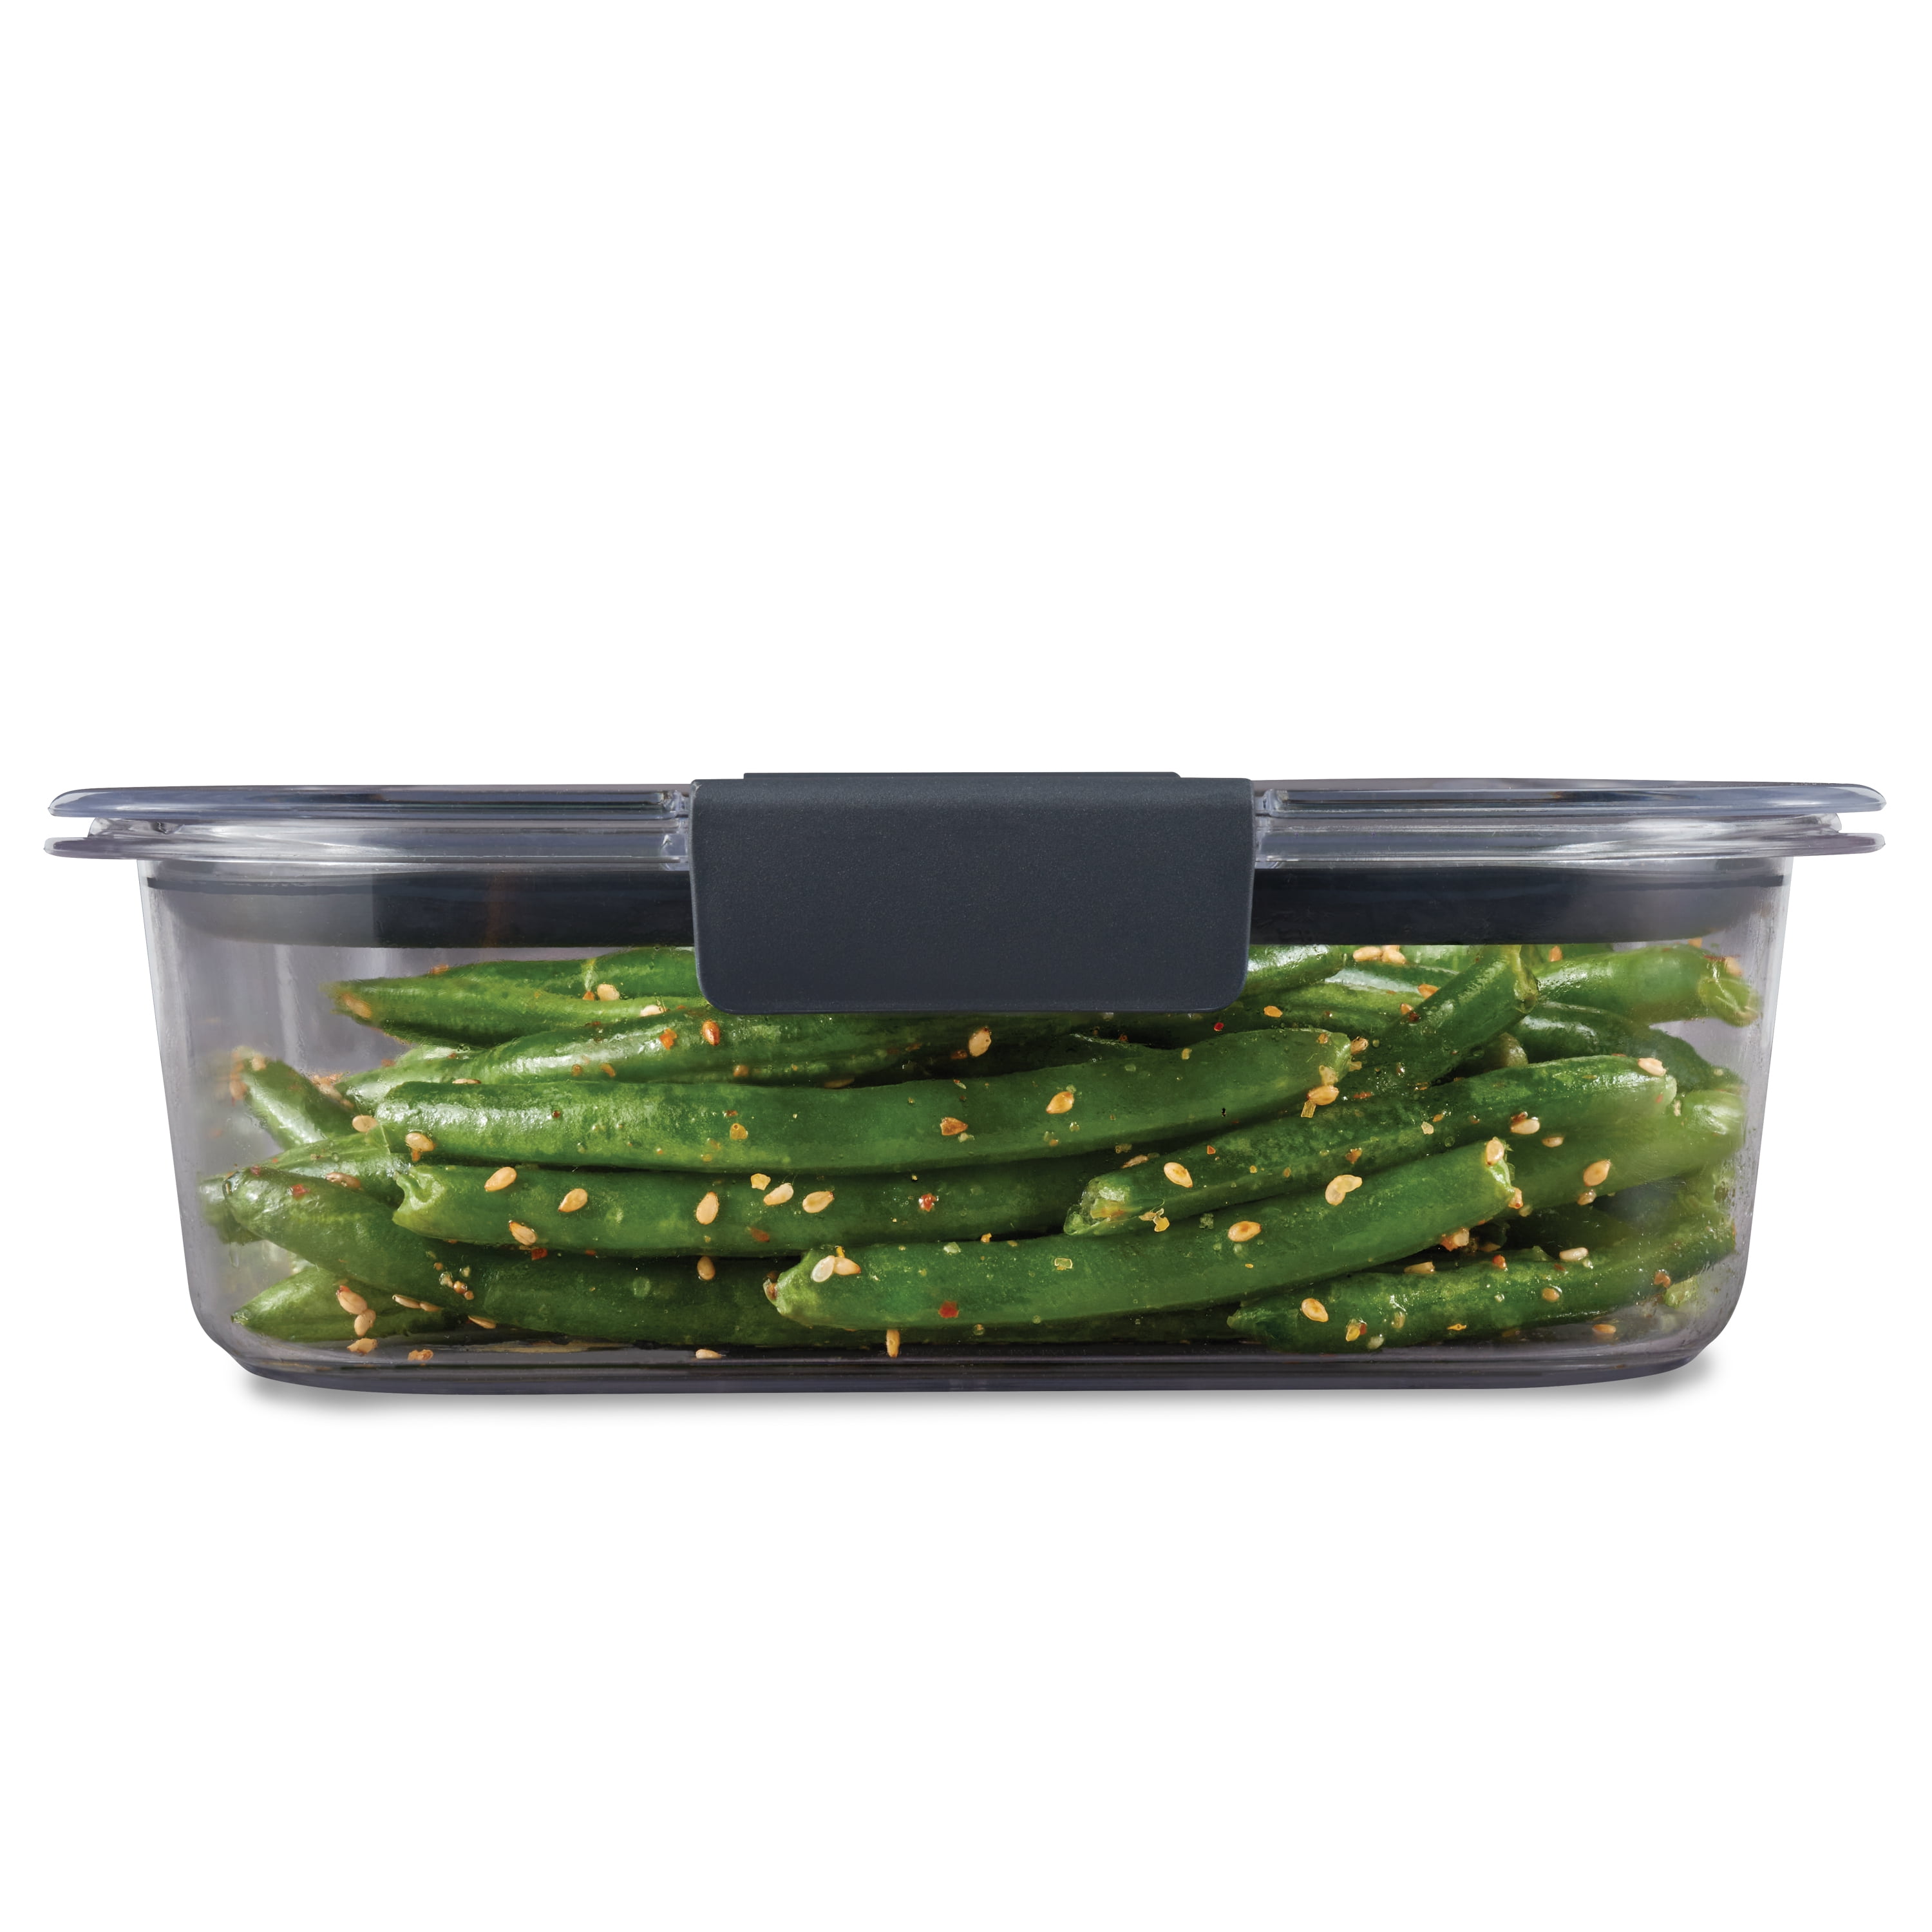 Rubbermaid® Brilliance Glass Storage Container, 3.2 c - Food 4 Less